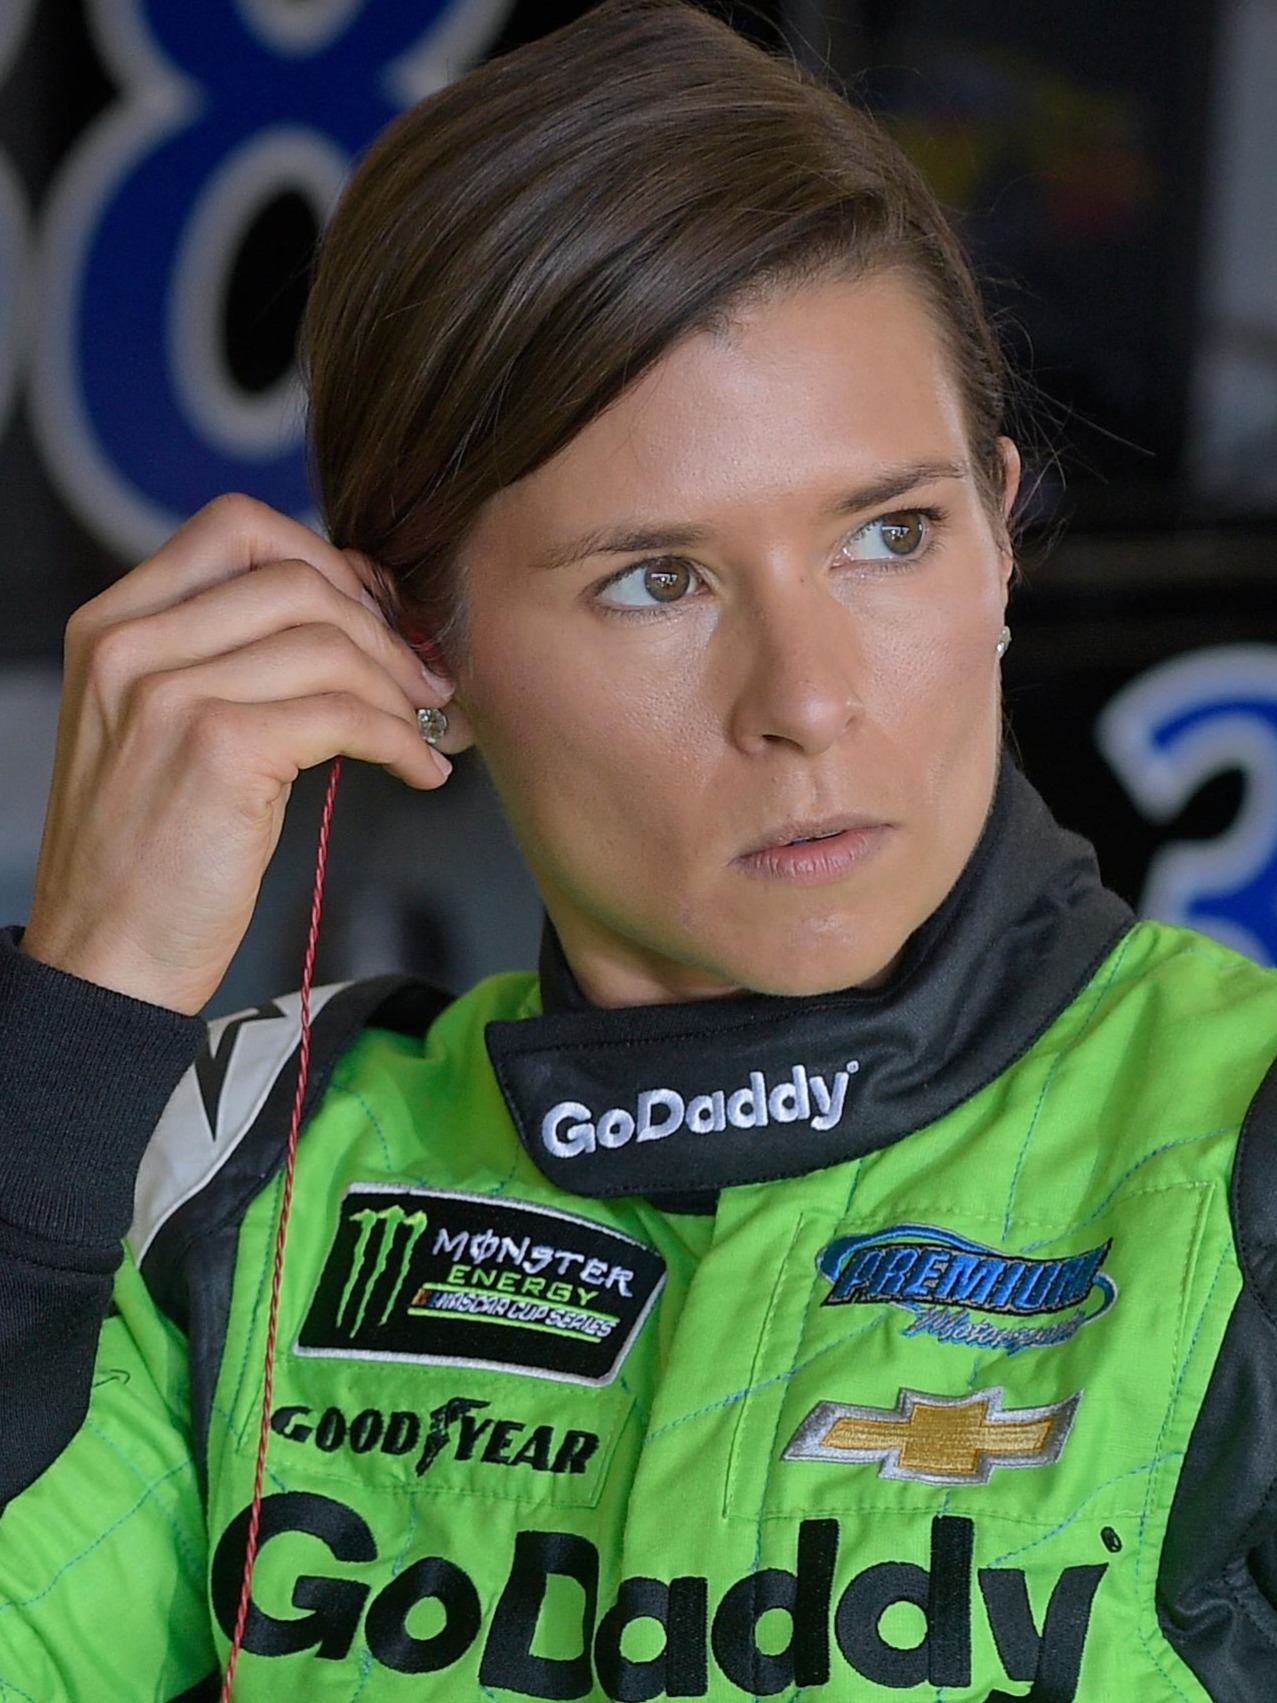 What was the highest position Danica Patrick achieved in the Indianapolis 500?